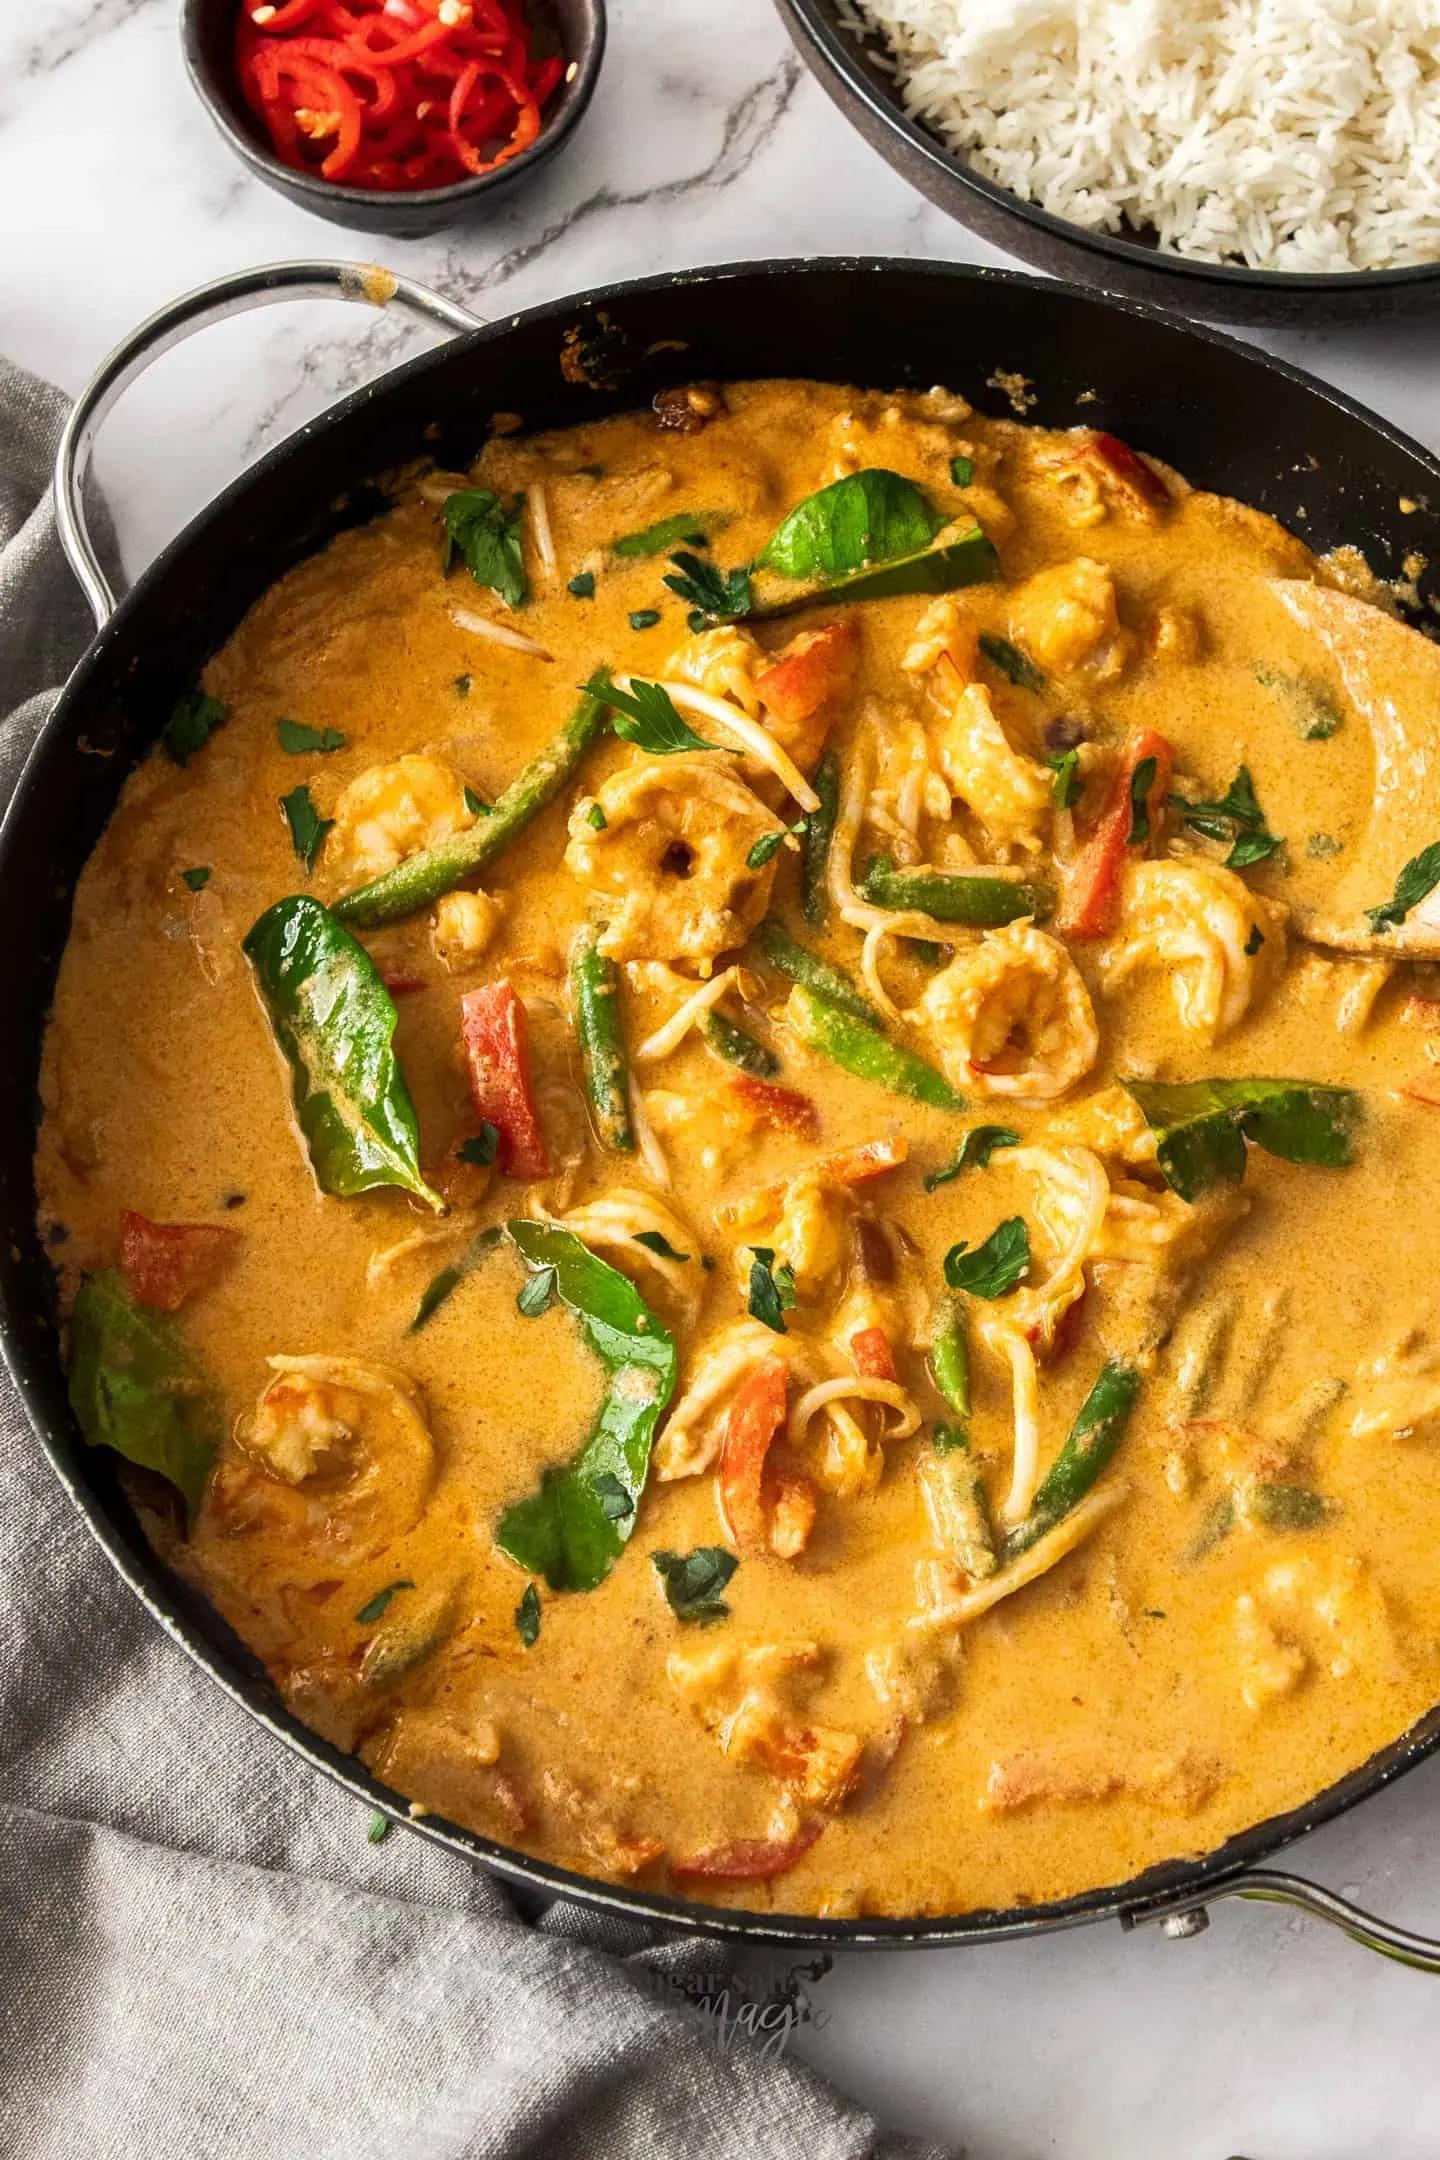 Want a simple curry that is rich and tasty? This Thai Panang Curry with ...